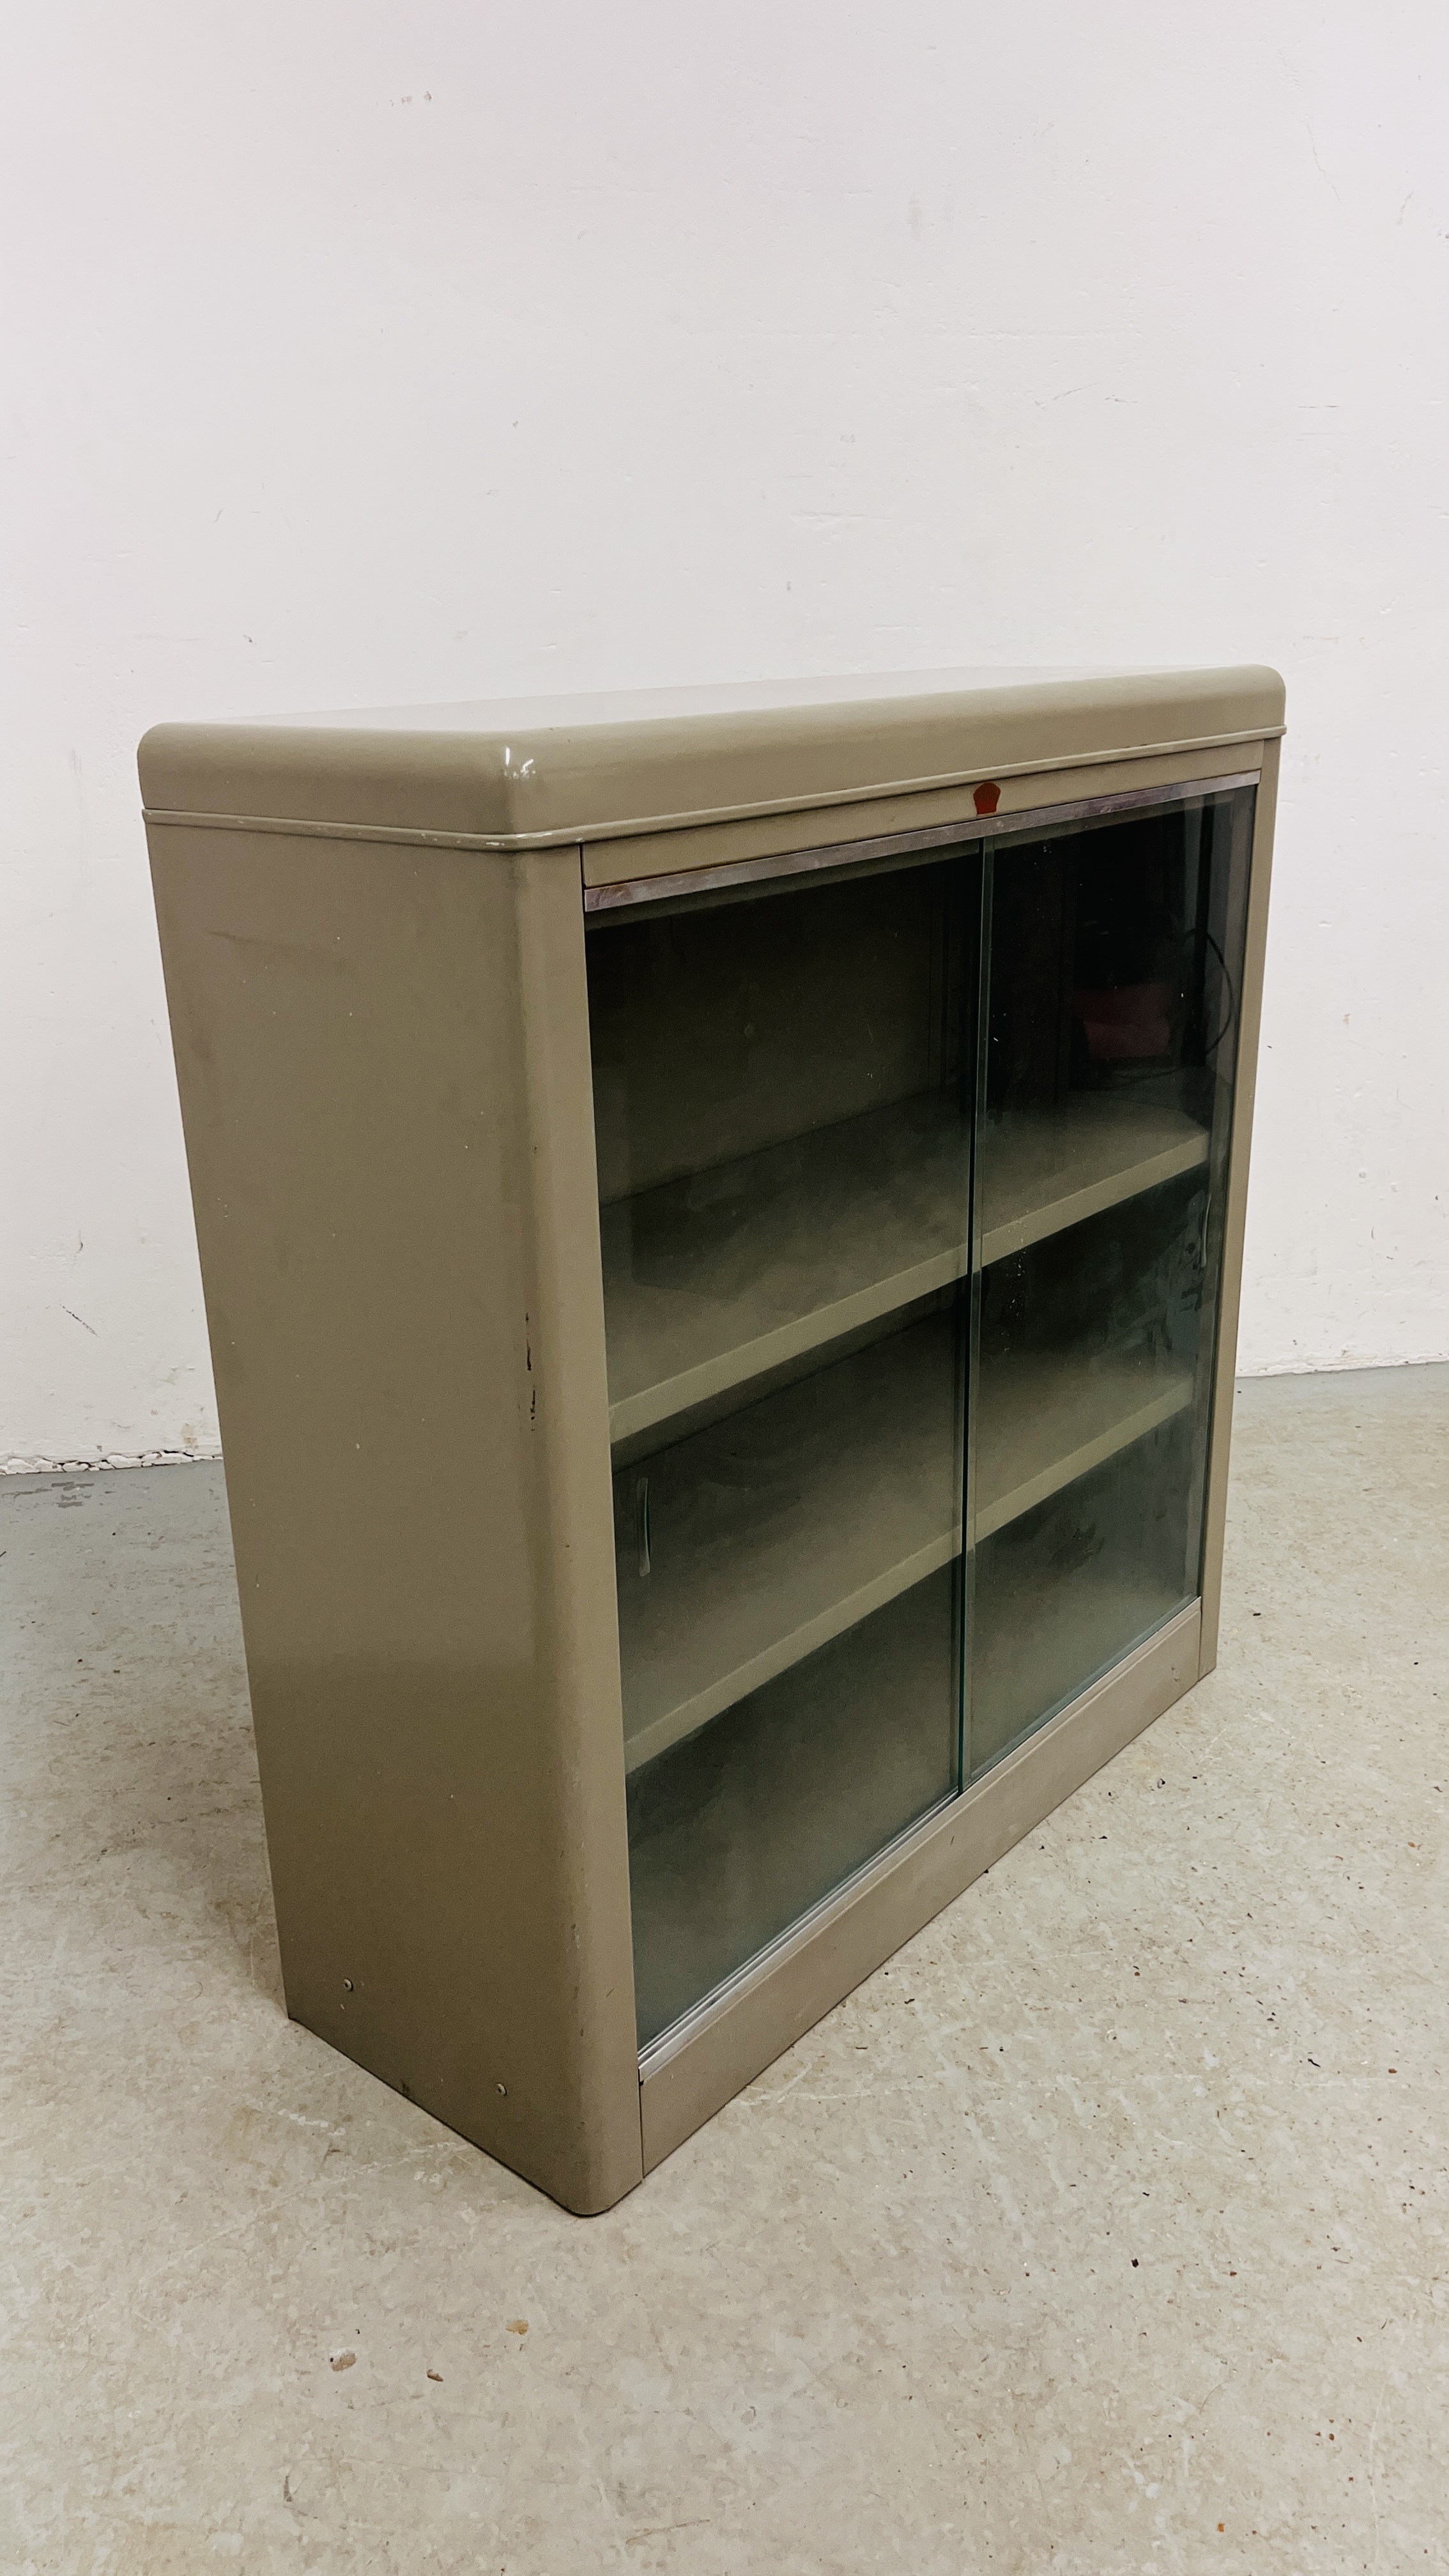 A VINTAGE HOWDEN STEEL EQUIPMENT BOOKCASE WITH SLIDING GLASS DOORS, W 89CM, D 31CM, H 92CM. - Image 2 of 8